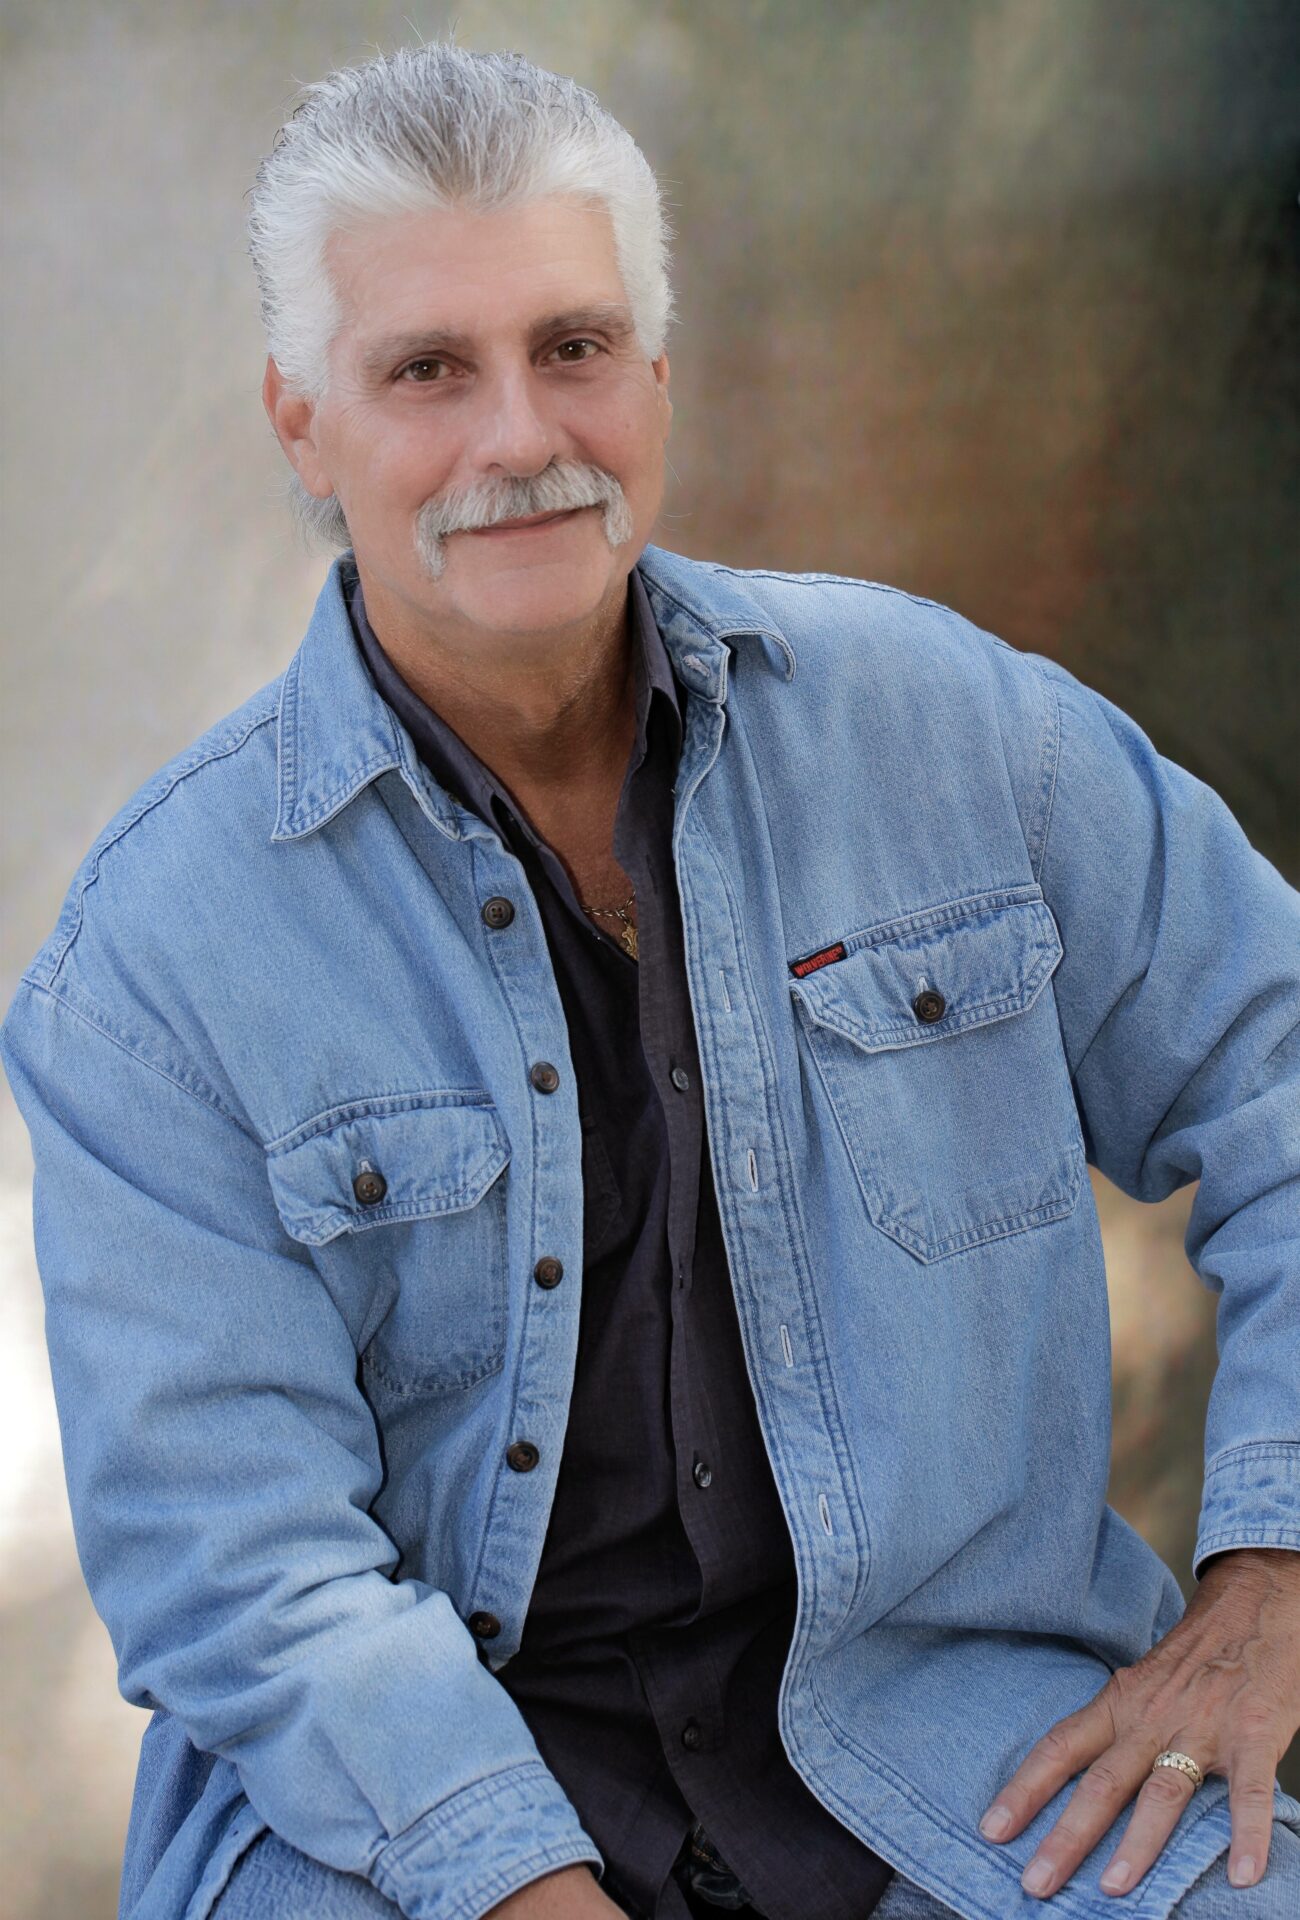 A man in a denim shirt is posing for a photo.